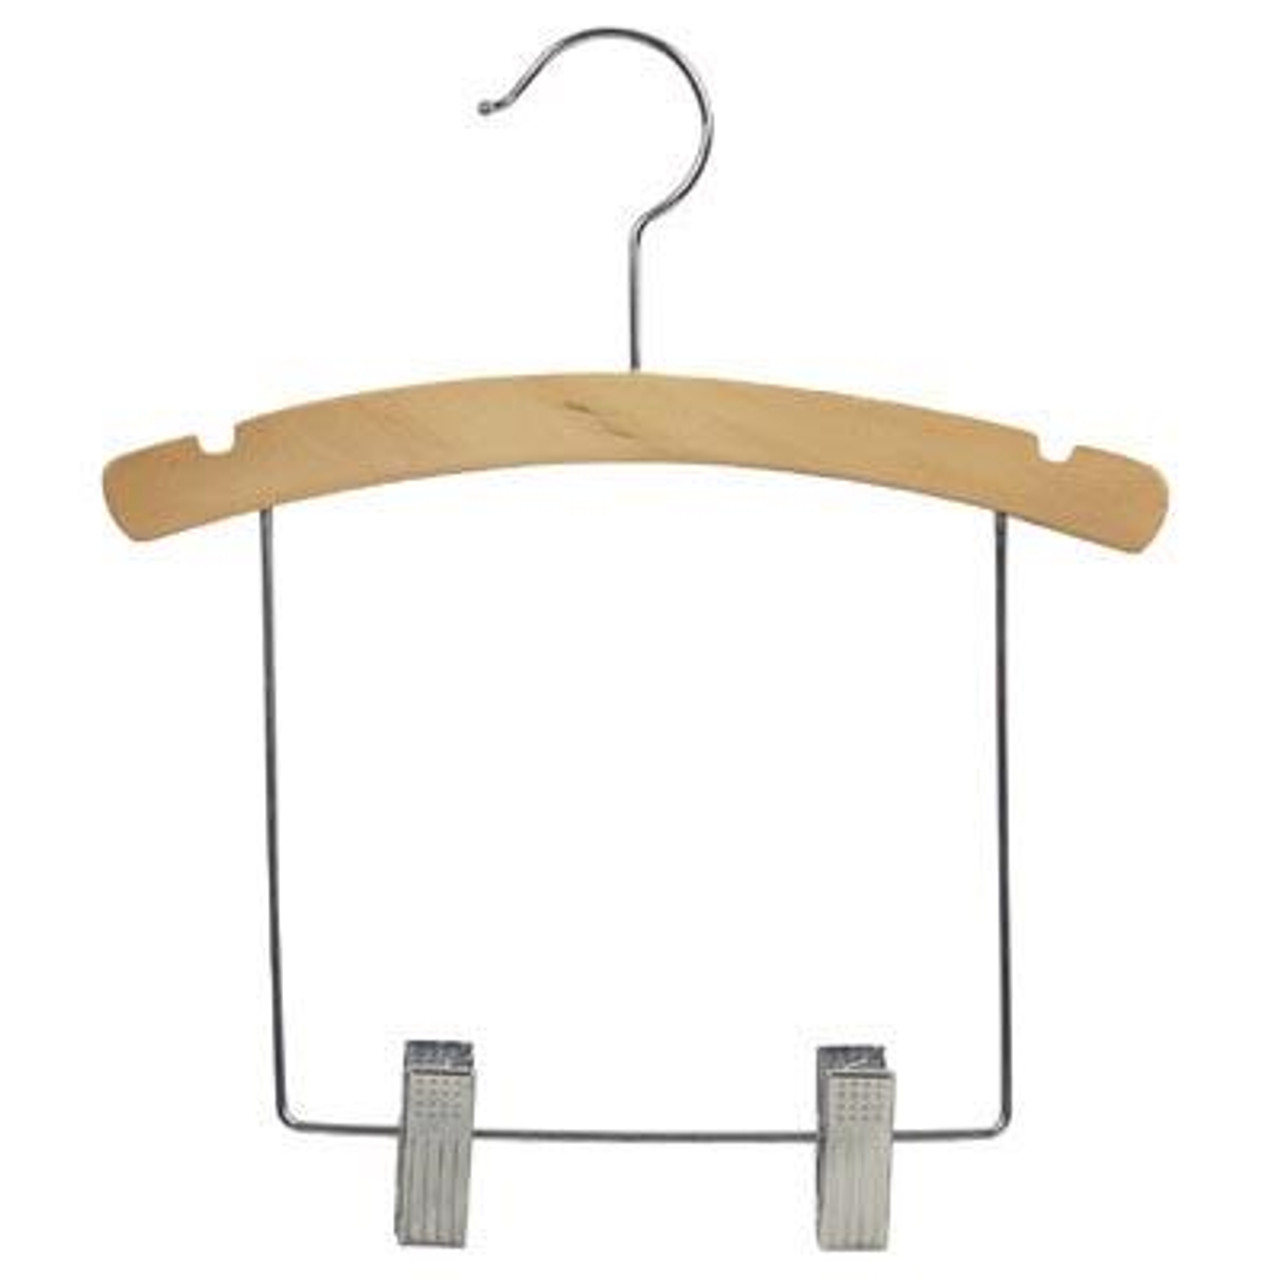 https://cdn11.bigcommerce.com/s-bxamz43bkh/images/stencil/1280x1280/products/8432/9299/12-inch-outfit-wood-hanger-with-6-inch-drop-bar-box-of-100-5__70190.1637023362.jpg?c=1